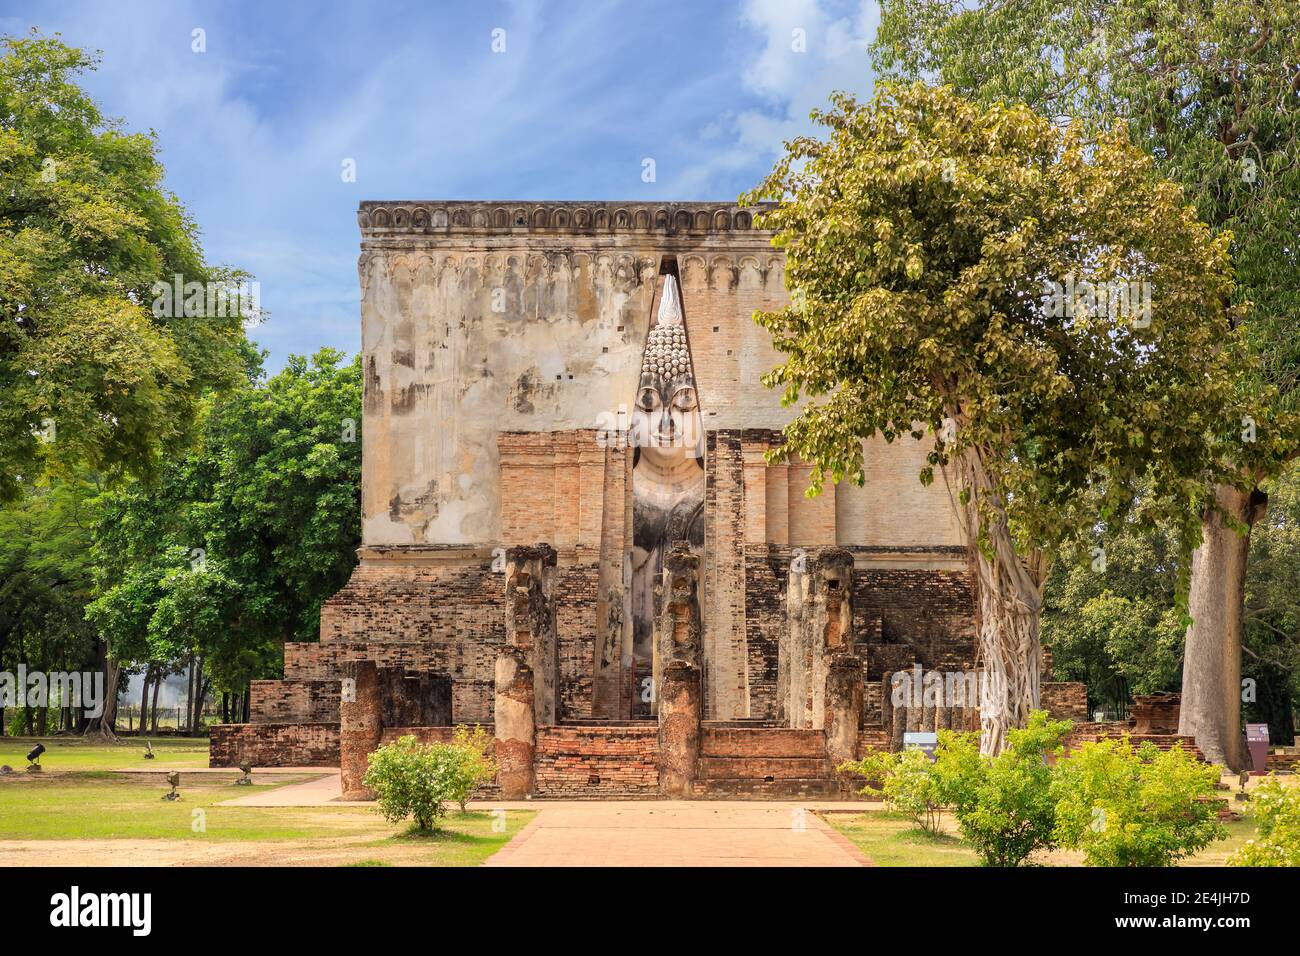 Famous big Buddha statue image named Phra Achana situated in ruined chapel at Wat Si Chum temple, Sukhothai Historical Park, Thailand Stock Photo